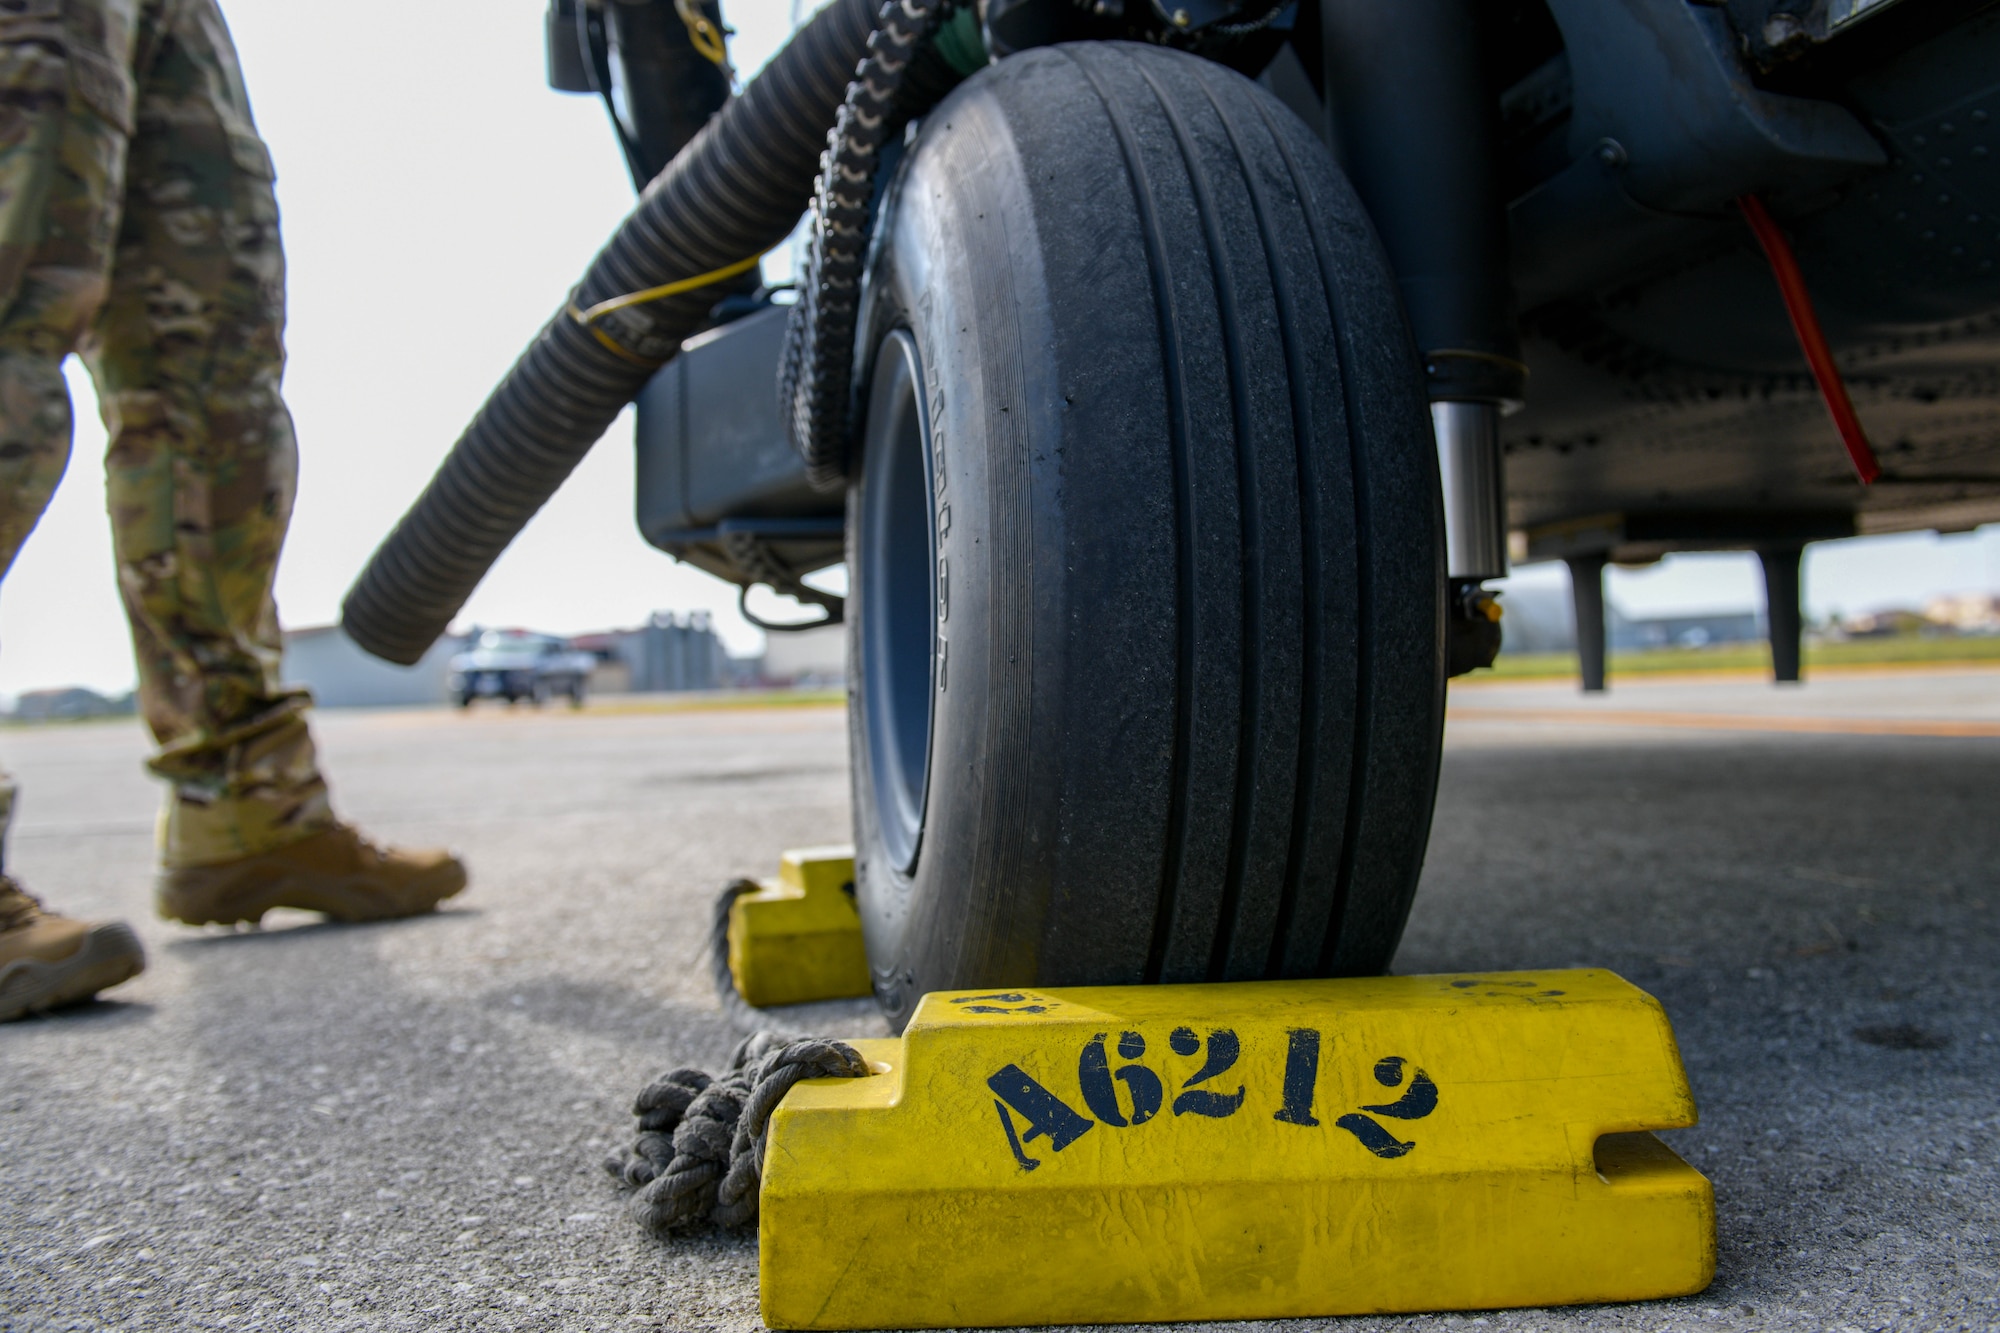 A U.S. Air Force Airman assigned to the 56th Rescue Squadron prepare an HH-60G Pave Hawk A6212 for its final sortie at Aviano Air Base, Italy, Sept. 23, 2021. Wheel chocks are wedges of sturdy material placed closely against a vehicle's wheels to prevent accidental movement and are placed for safety in addition to setting the brakes. (U.S. Air Force photo by Senior Airman Brooke Moeder)